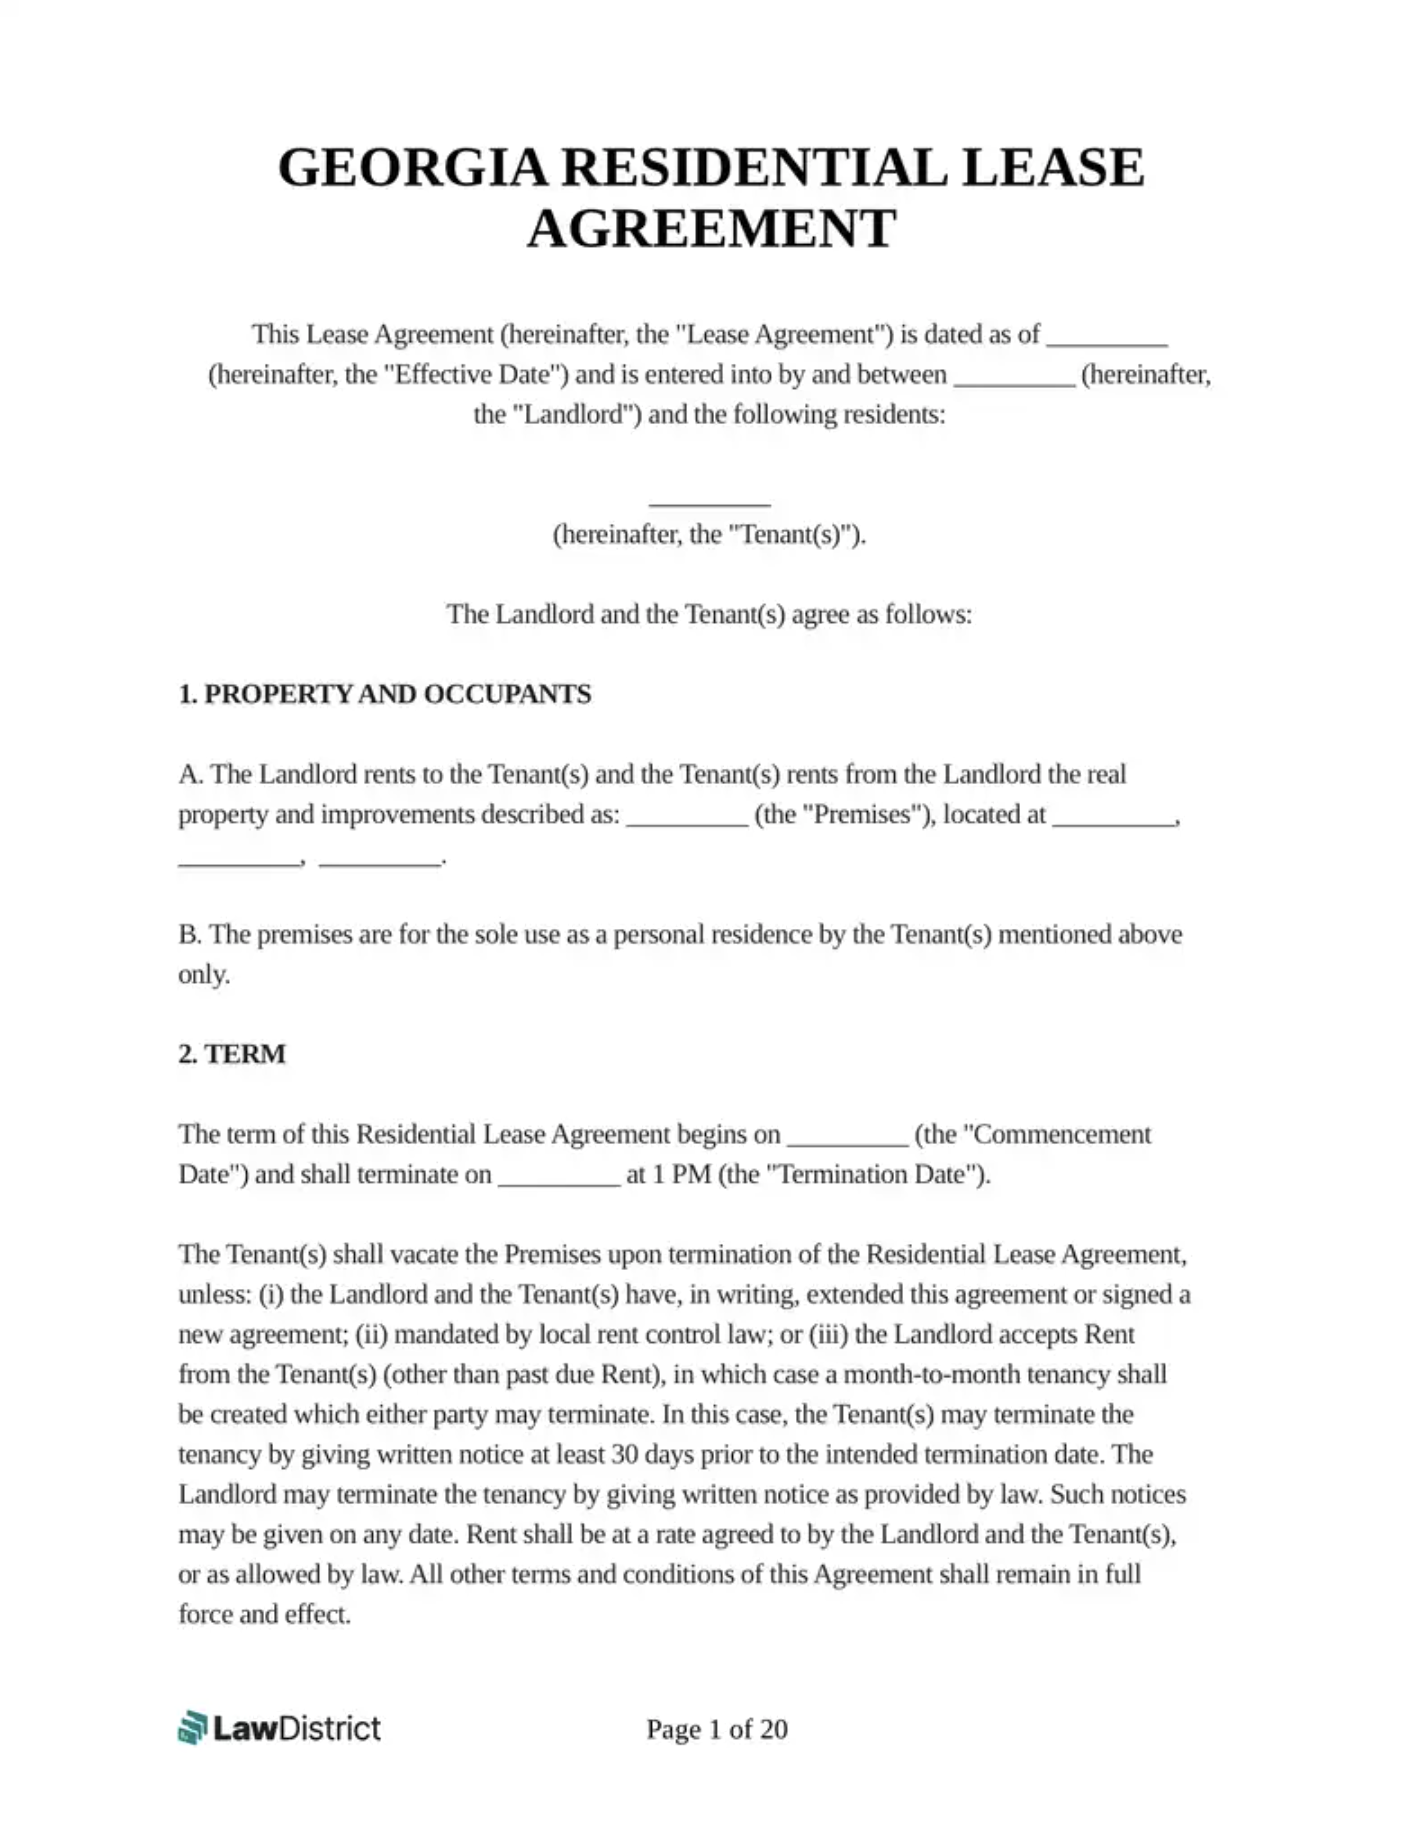 LawDistrict Georgia Residential Lease Agreement